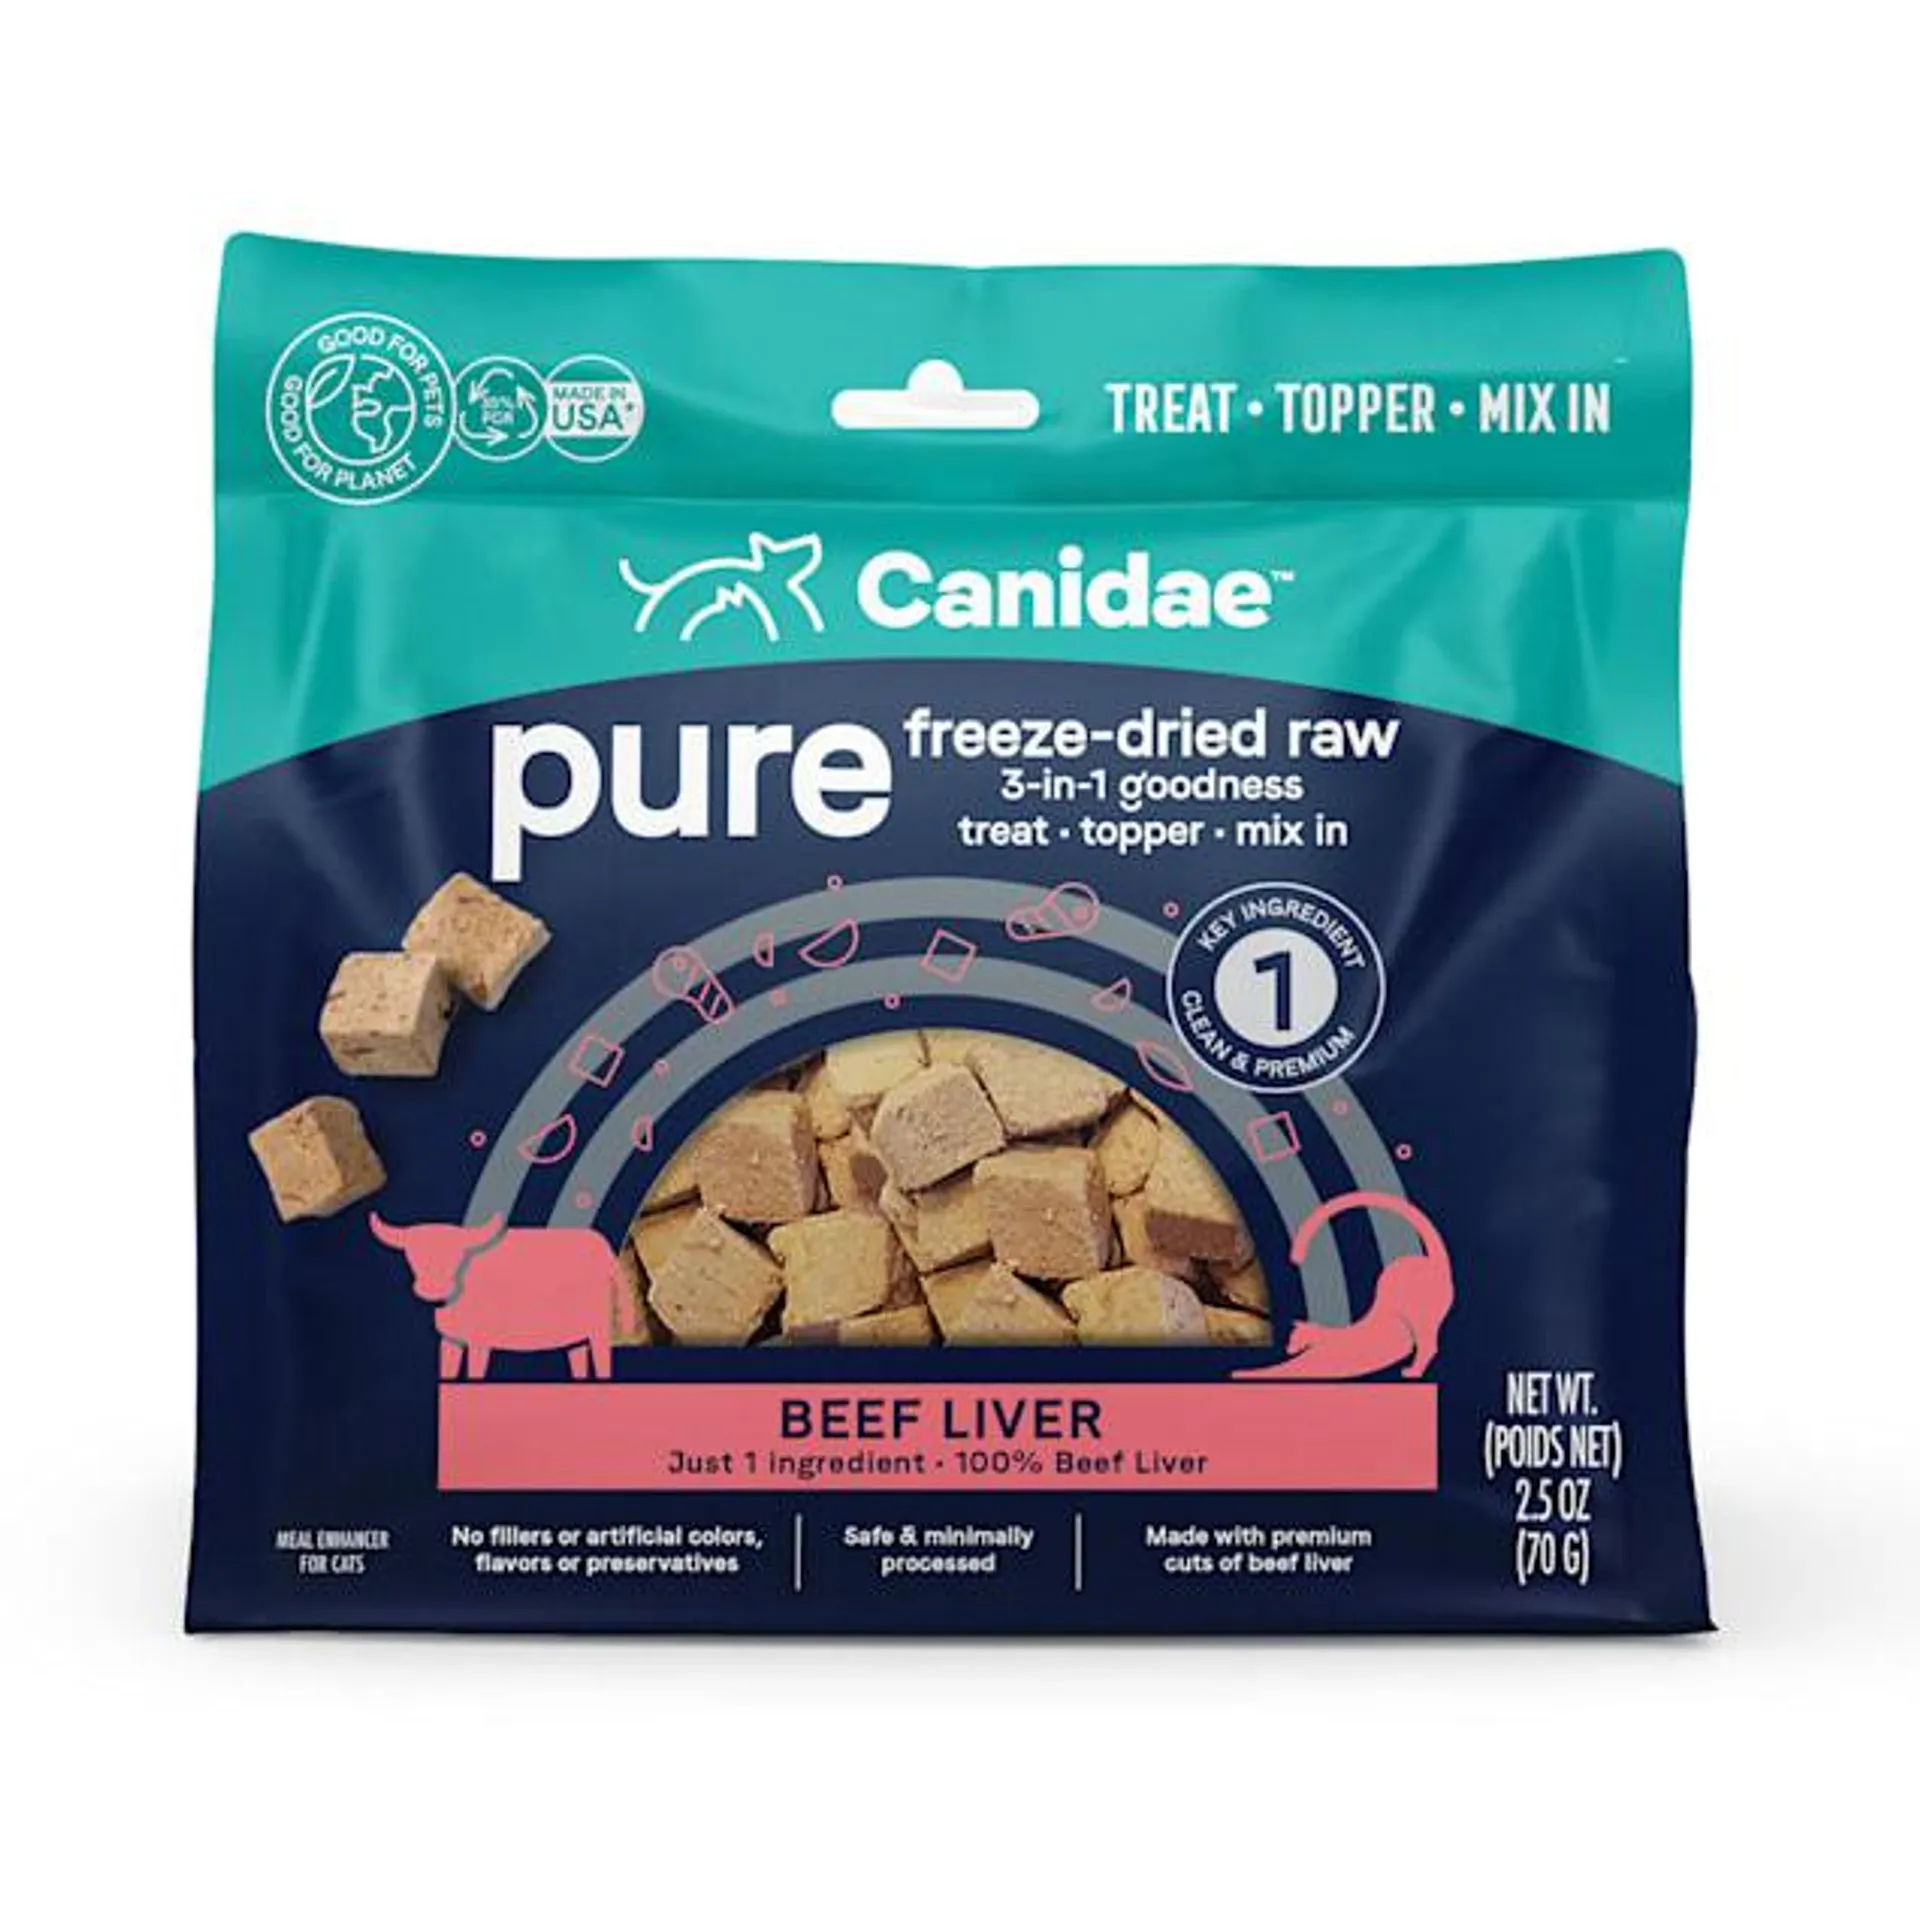 Canidae Pure 3-in-1 Goodness Freeze Dried Raw Beef Liver Cat Food, 2.5 oz.